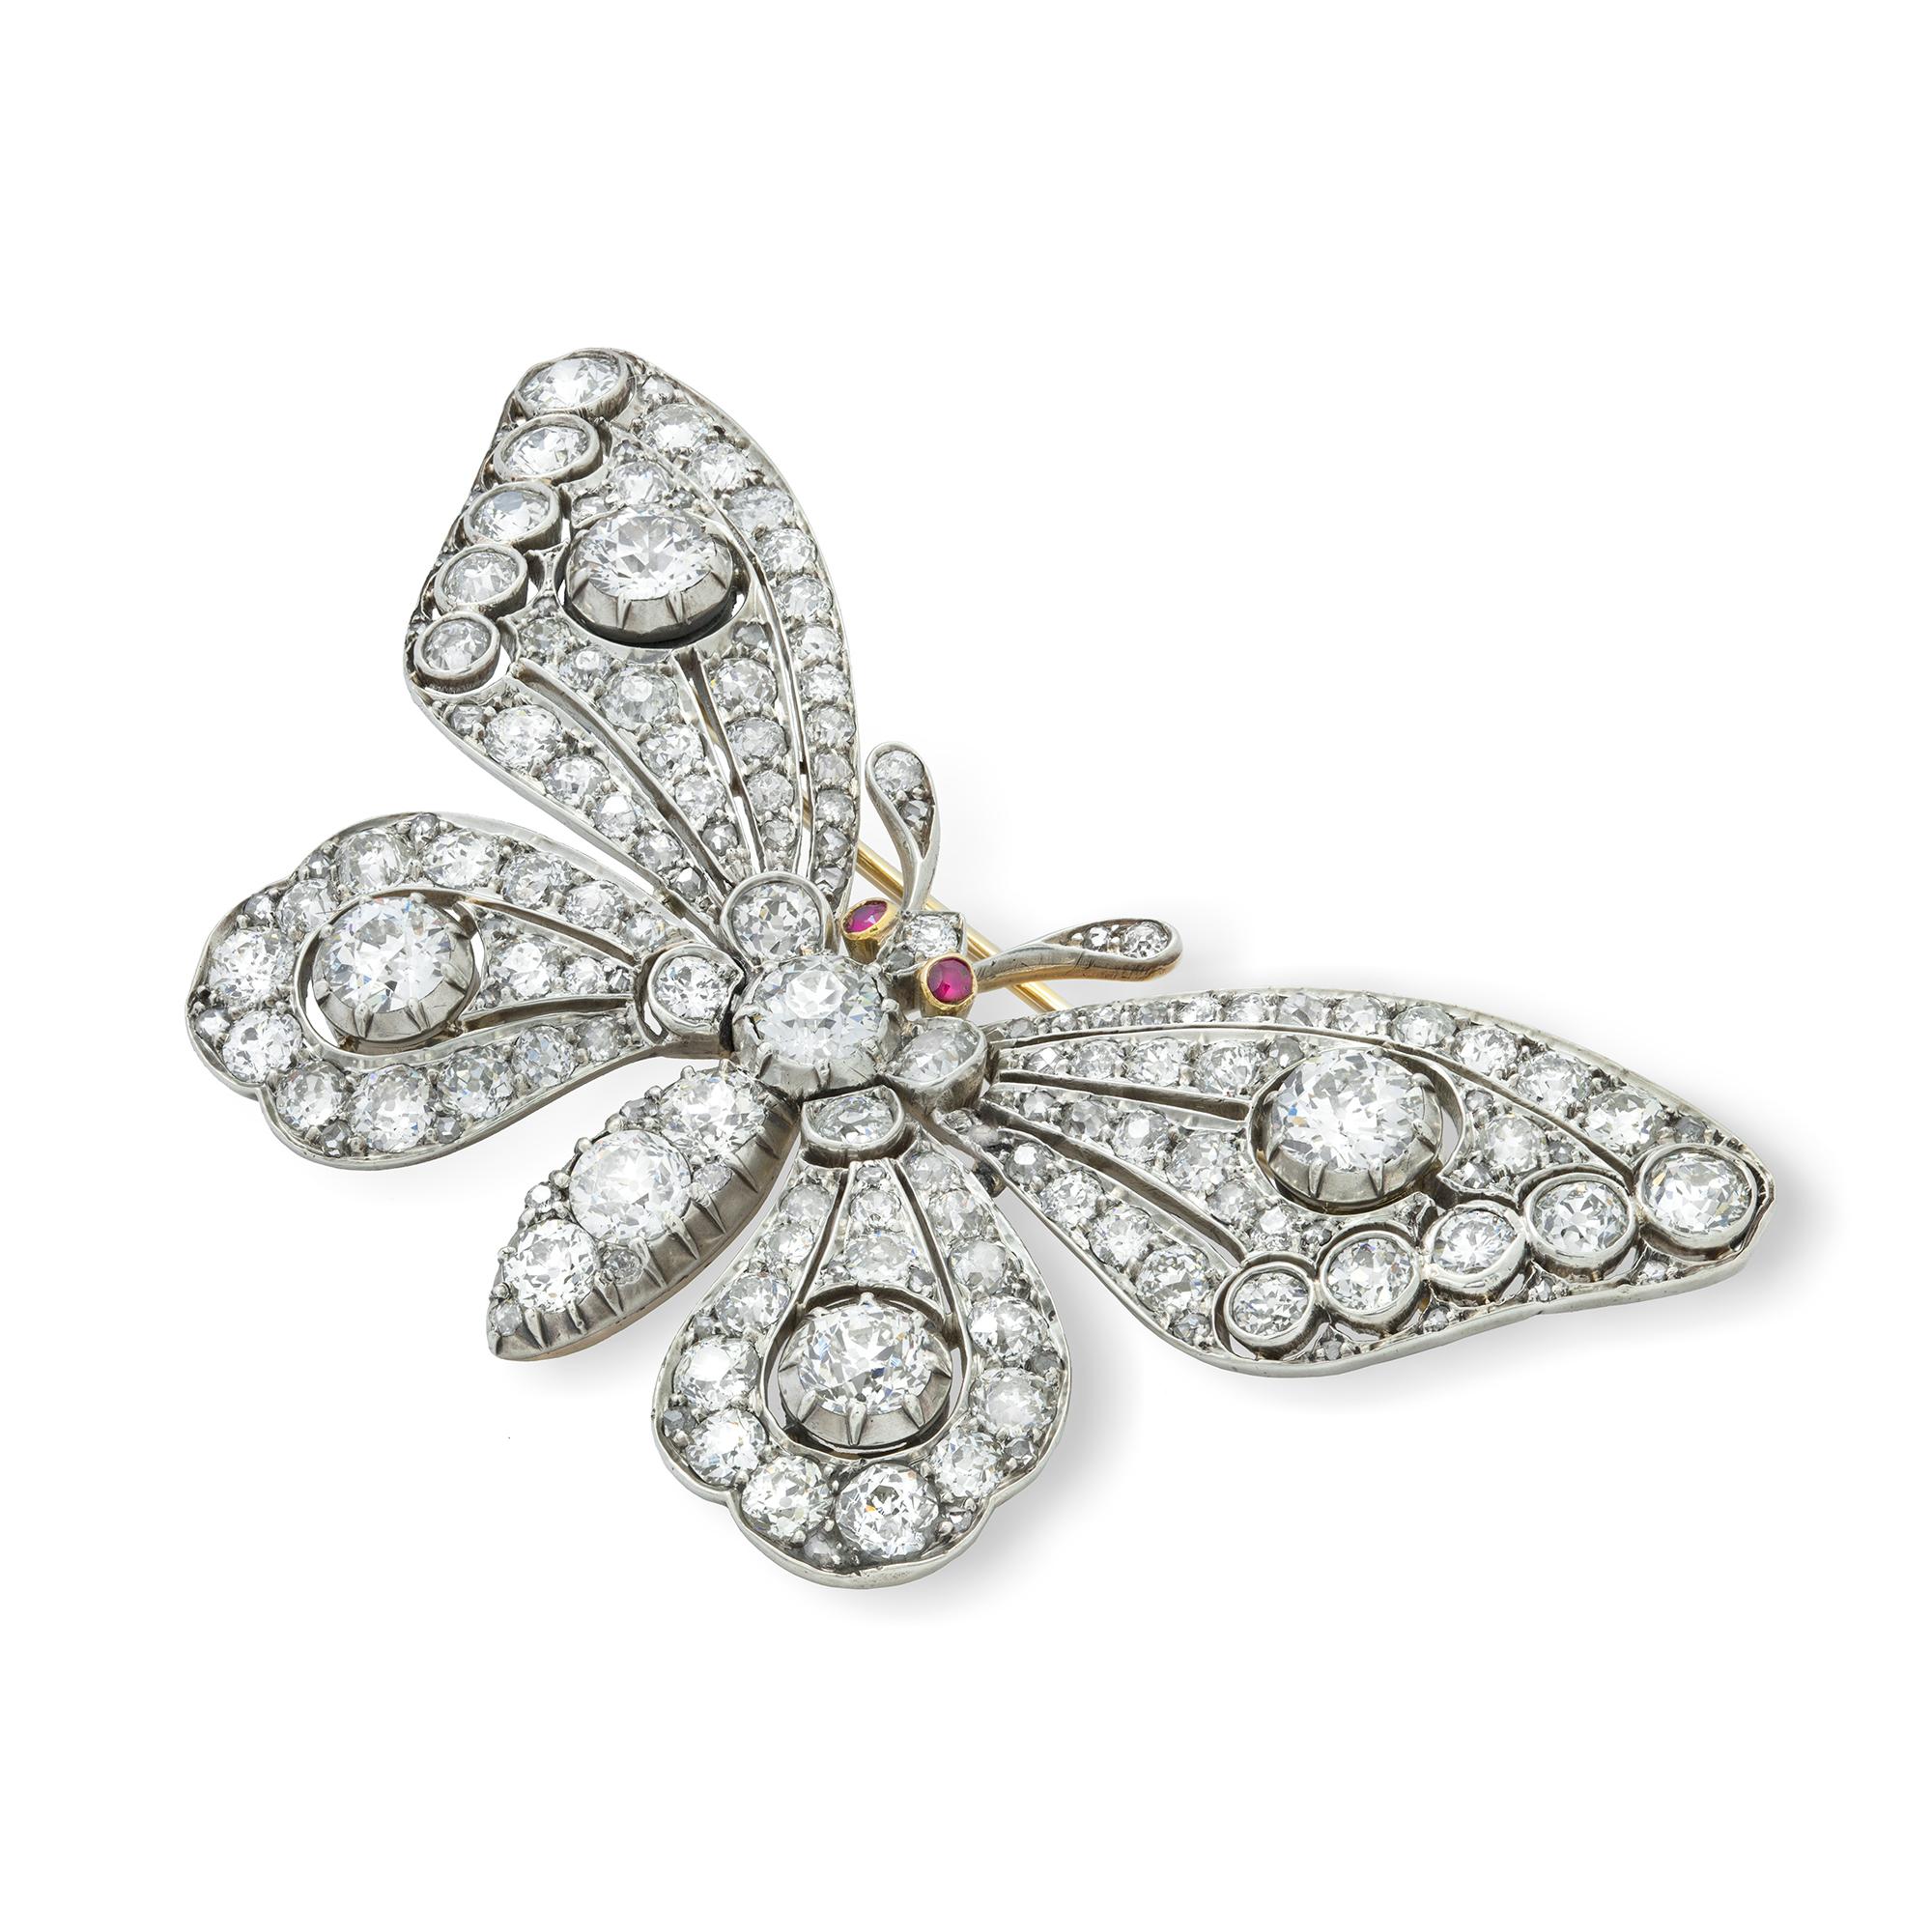 A Magnificent late Victorian diamond-set butterfly brooch, the brooch in the form of a butterfly, the body, pierced wings and head set throughout with old brilliant- and rose-cut diamonds, estimated to weigh a total of 15 carats, with ruby eyes, all